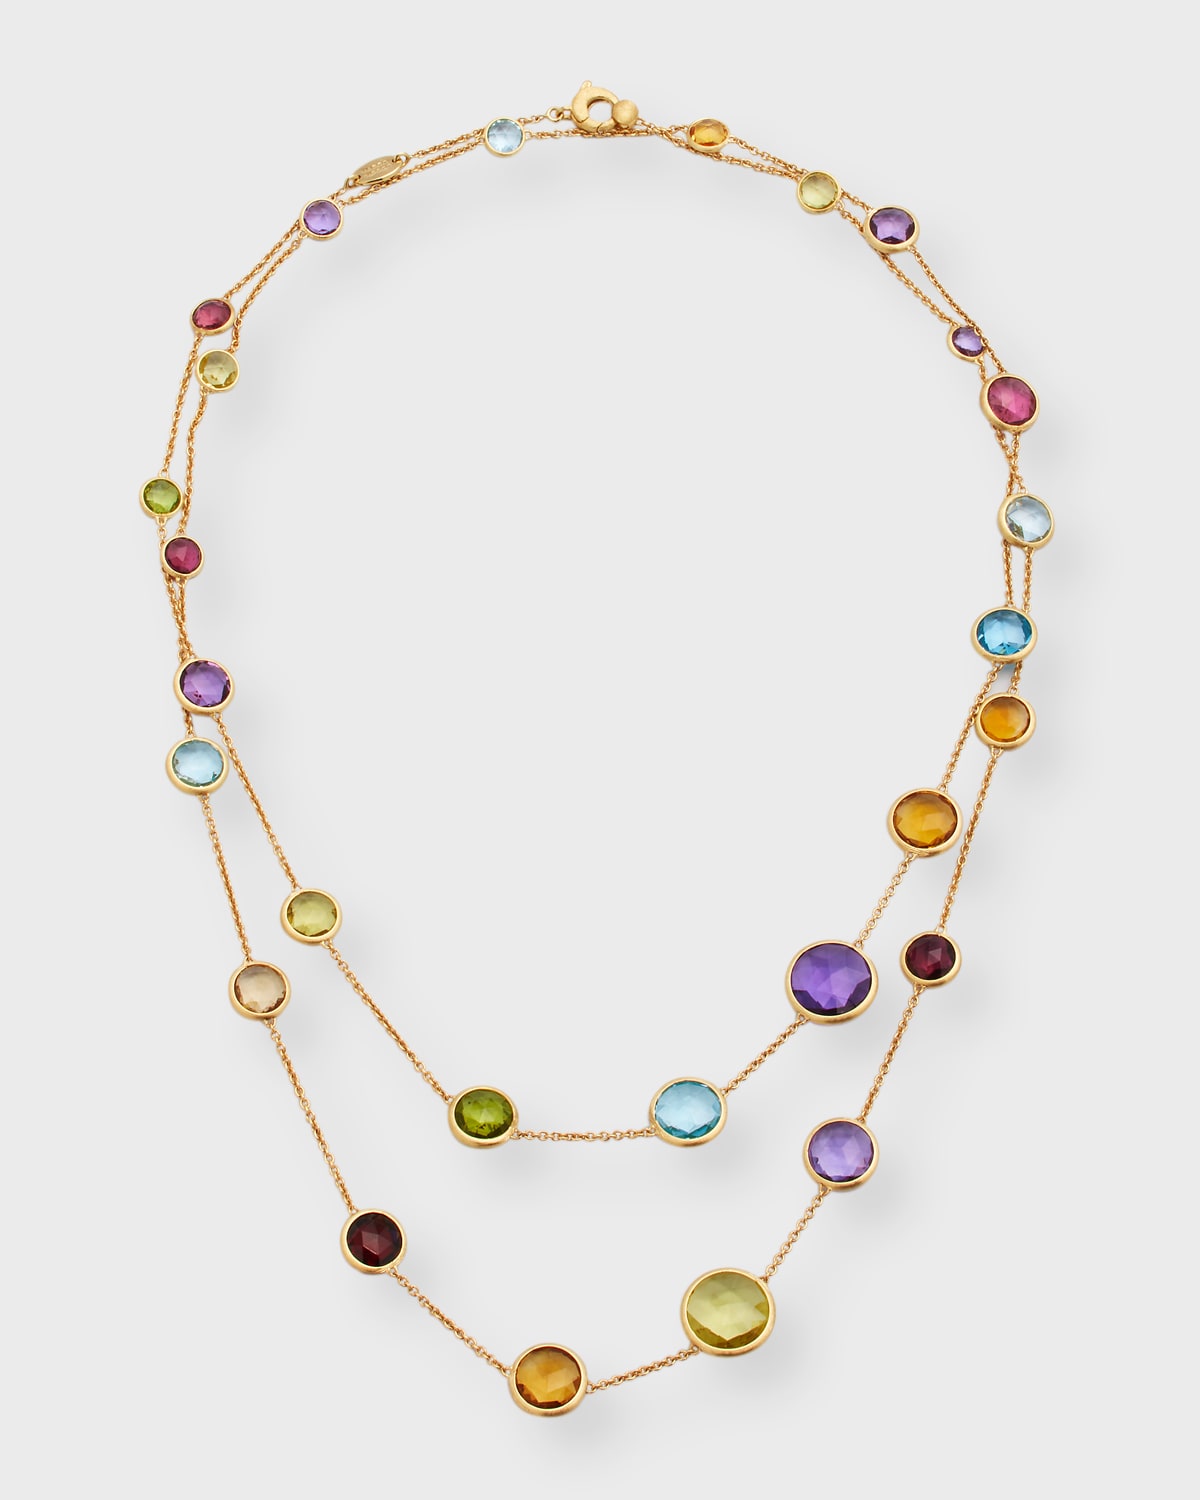 Jaipur Color Long Necklace with Mixed Stones, 36"L